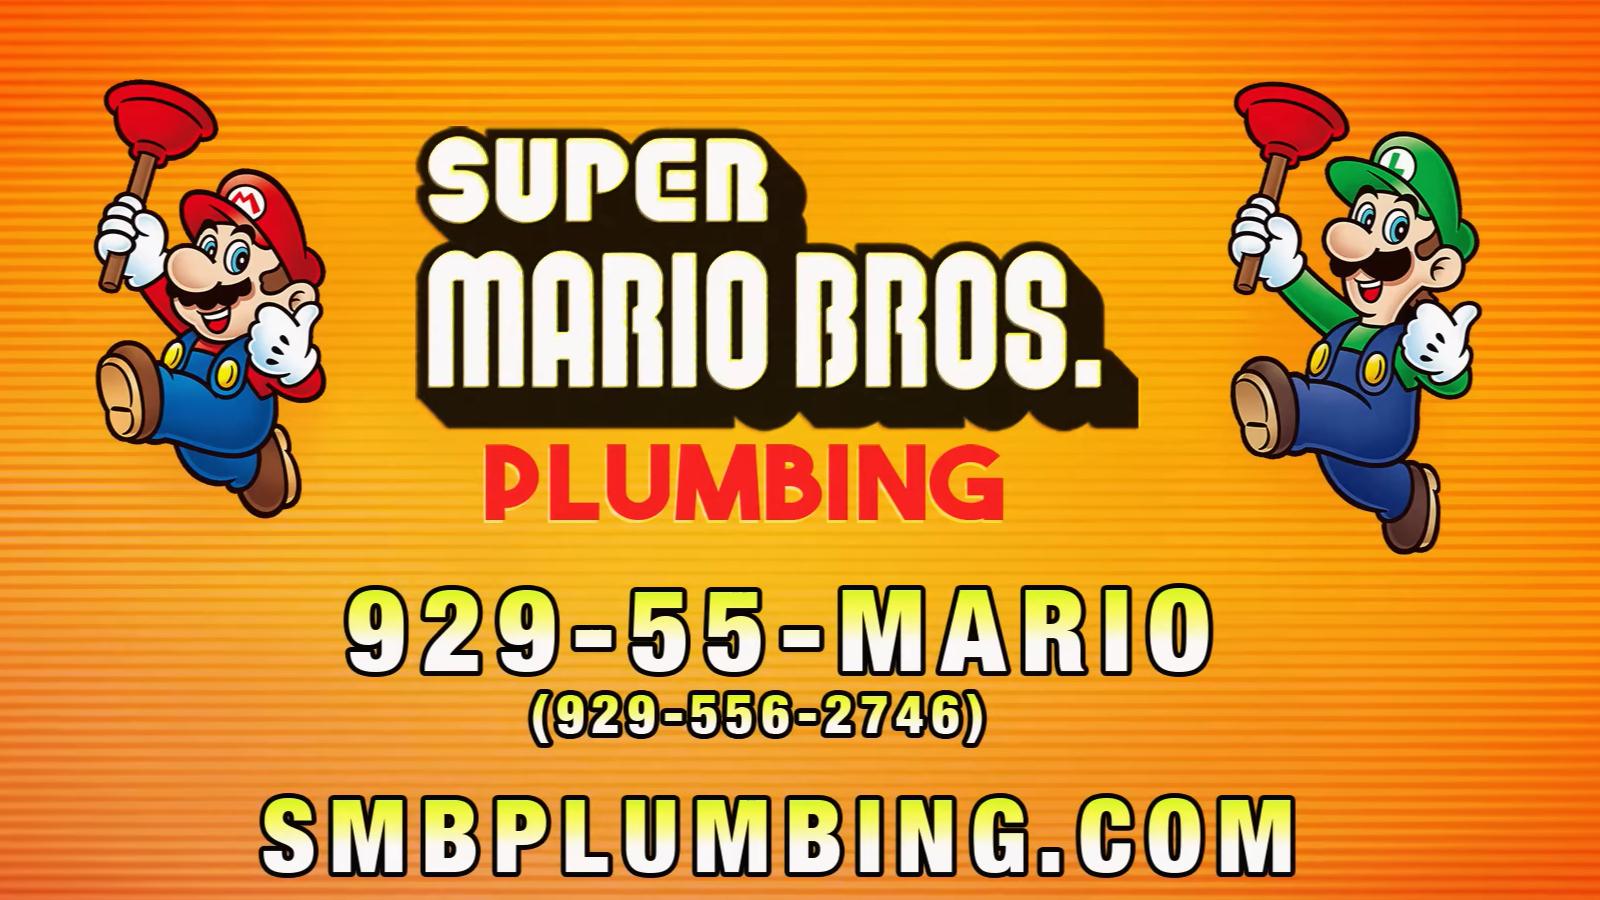 The Super Mario. Bros Plumbing movie trailer has all kinds of Easter eggs.